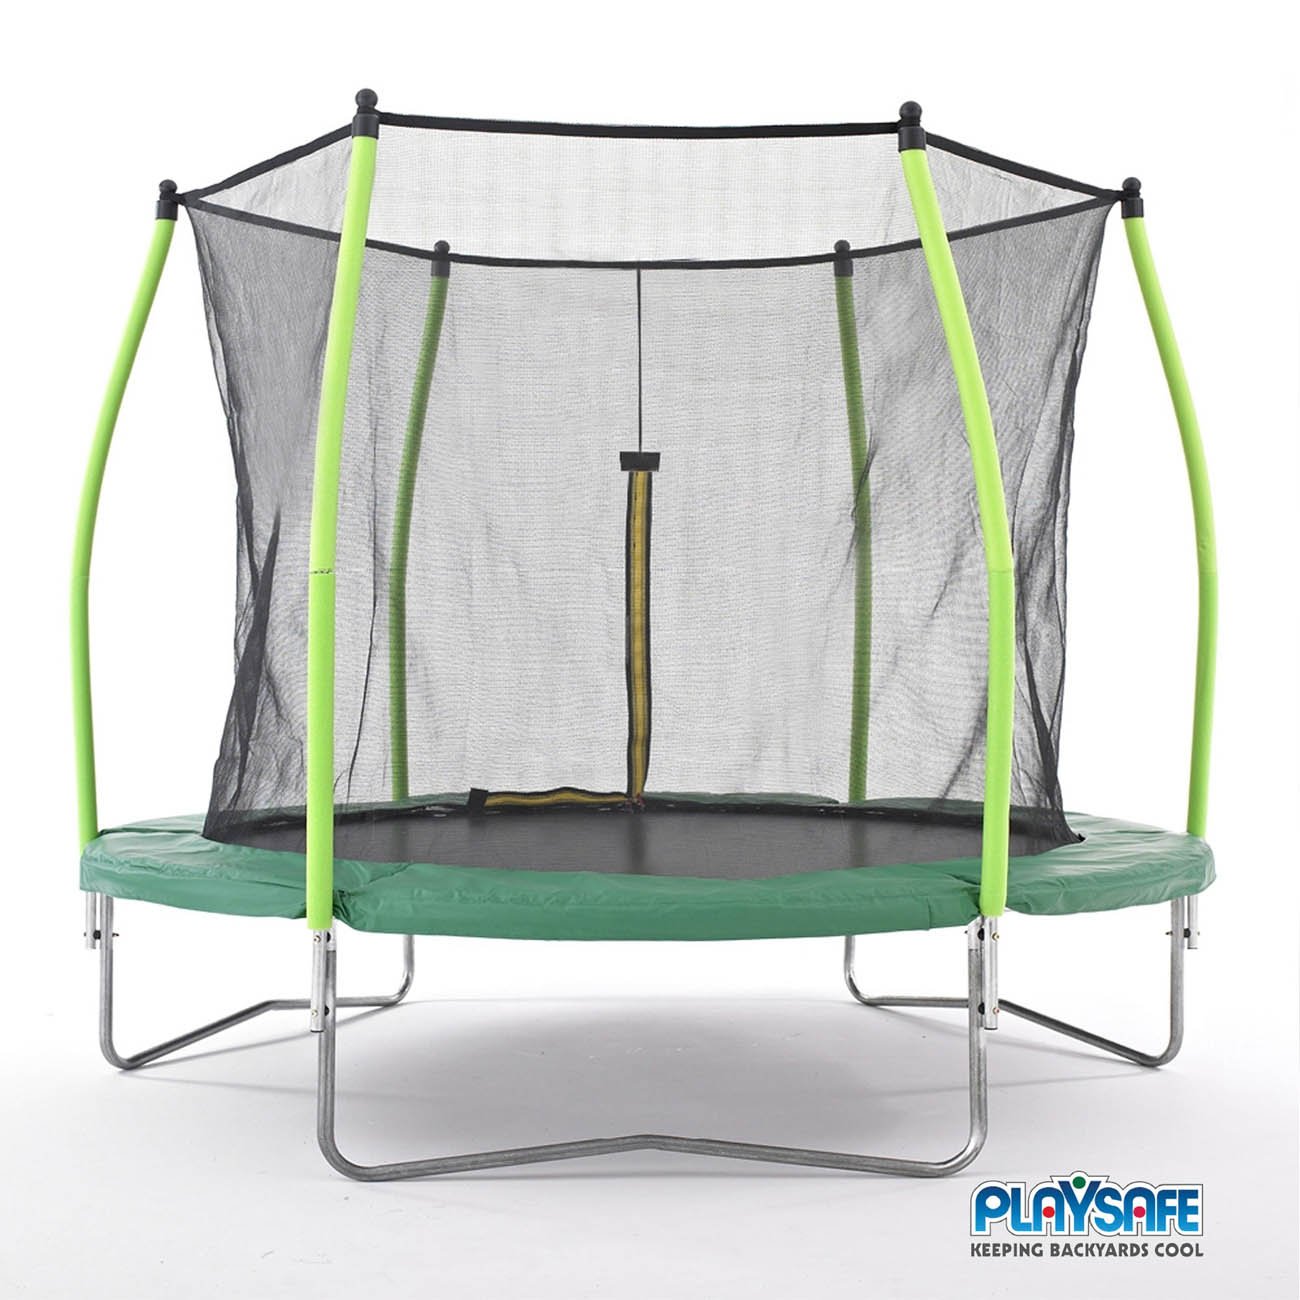 Playsafe Trampoline Combo 10ft (2 boxes)